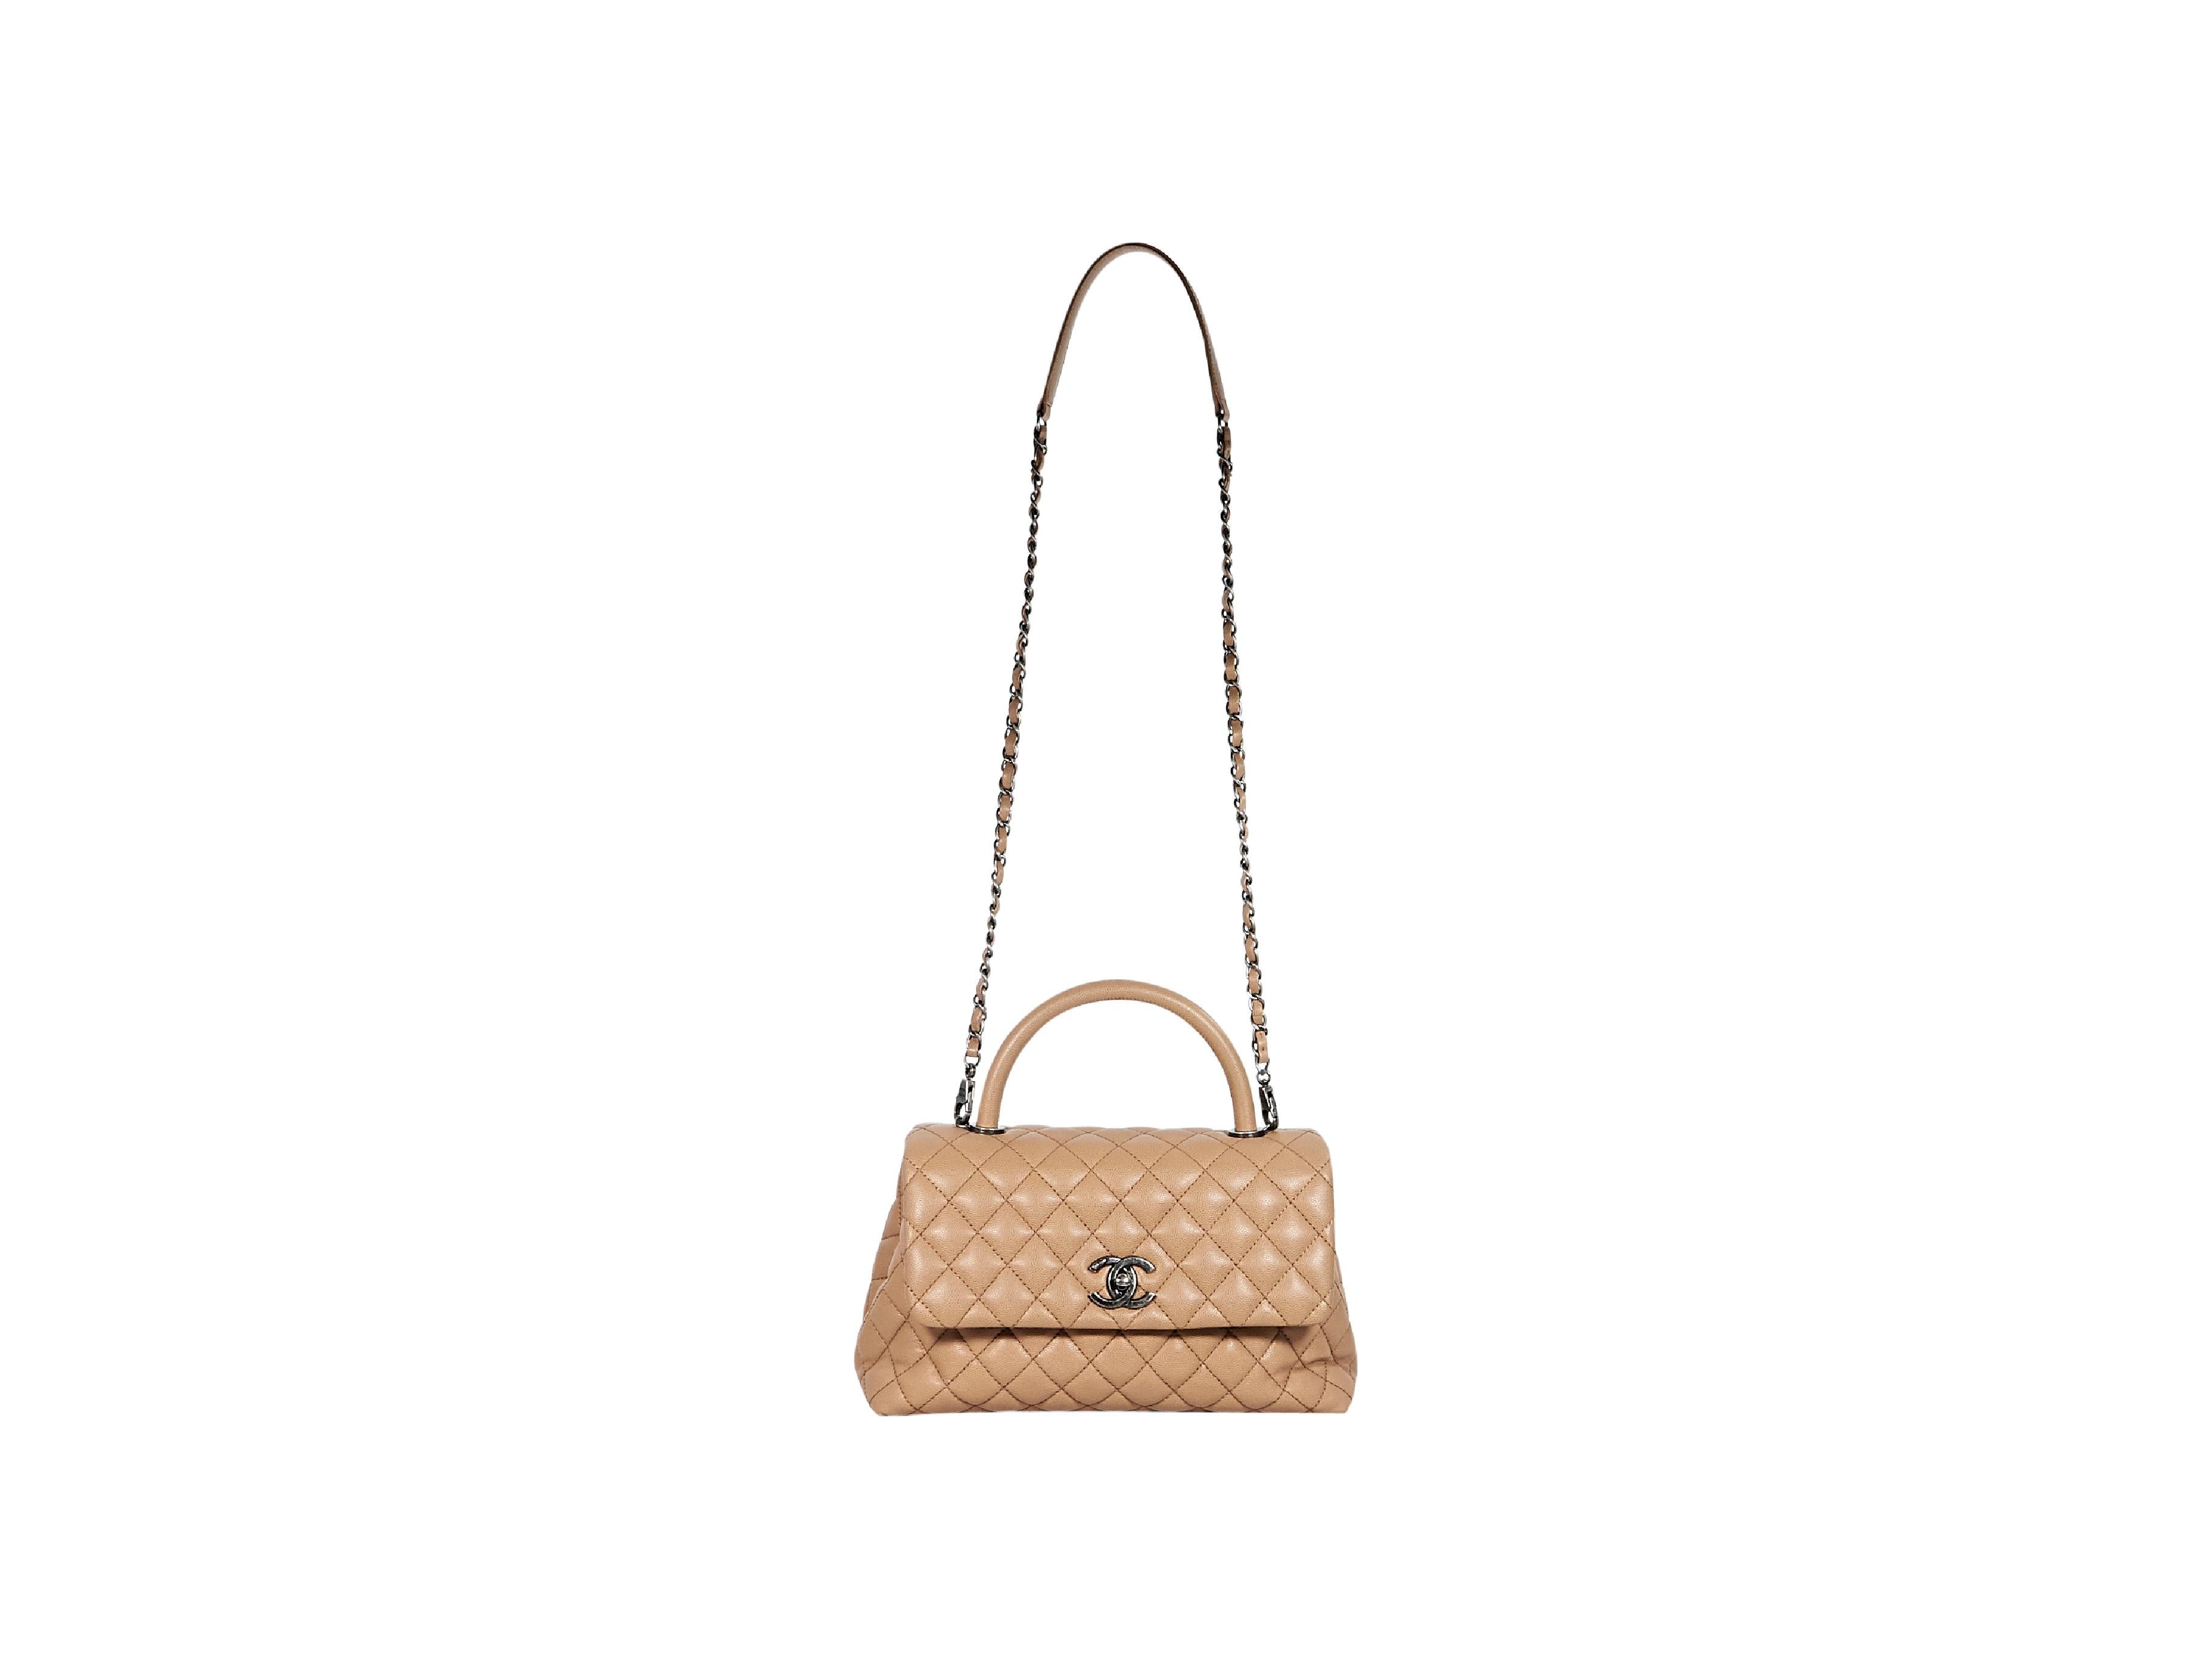 Product details:  Tan quilted caviar leather flap satchel bag by Chanel.  Top carry handle.  Detachable chain crossbody strap.  Front flap with twist-lock logo closure.  Lined interior with inner zip and slide pockets.  Back exterior slide pocket. 